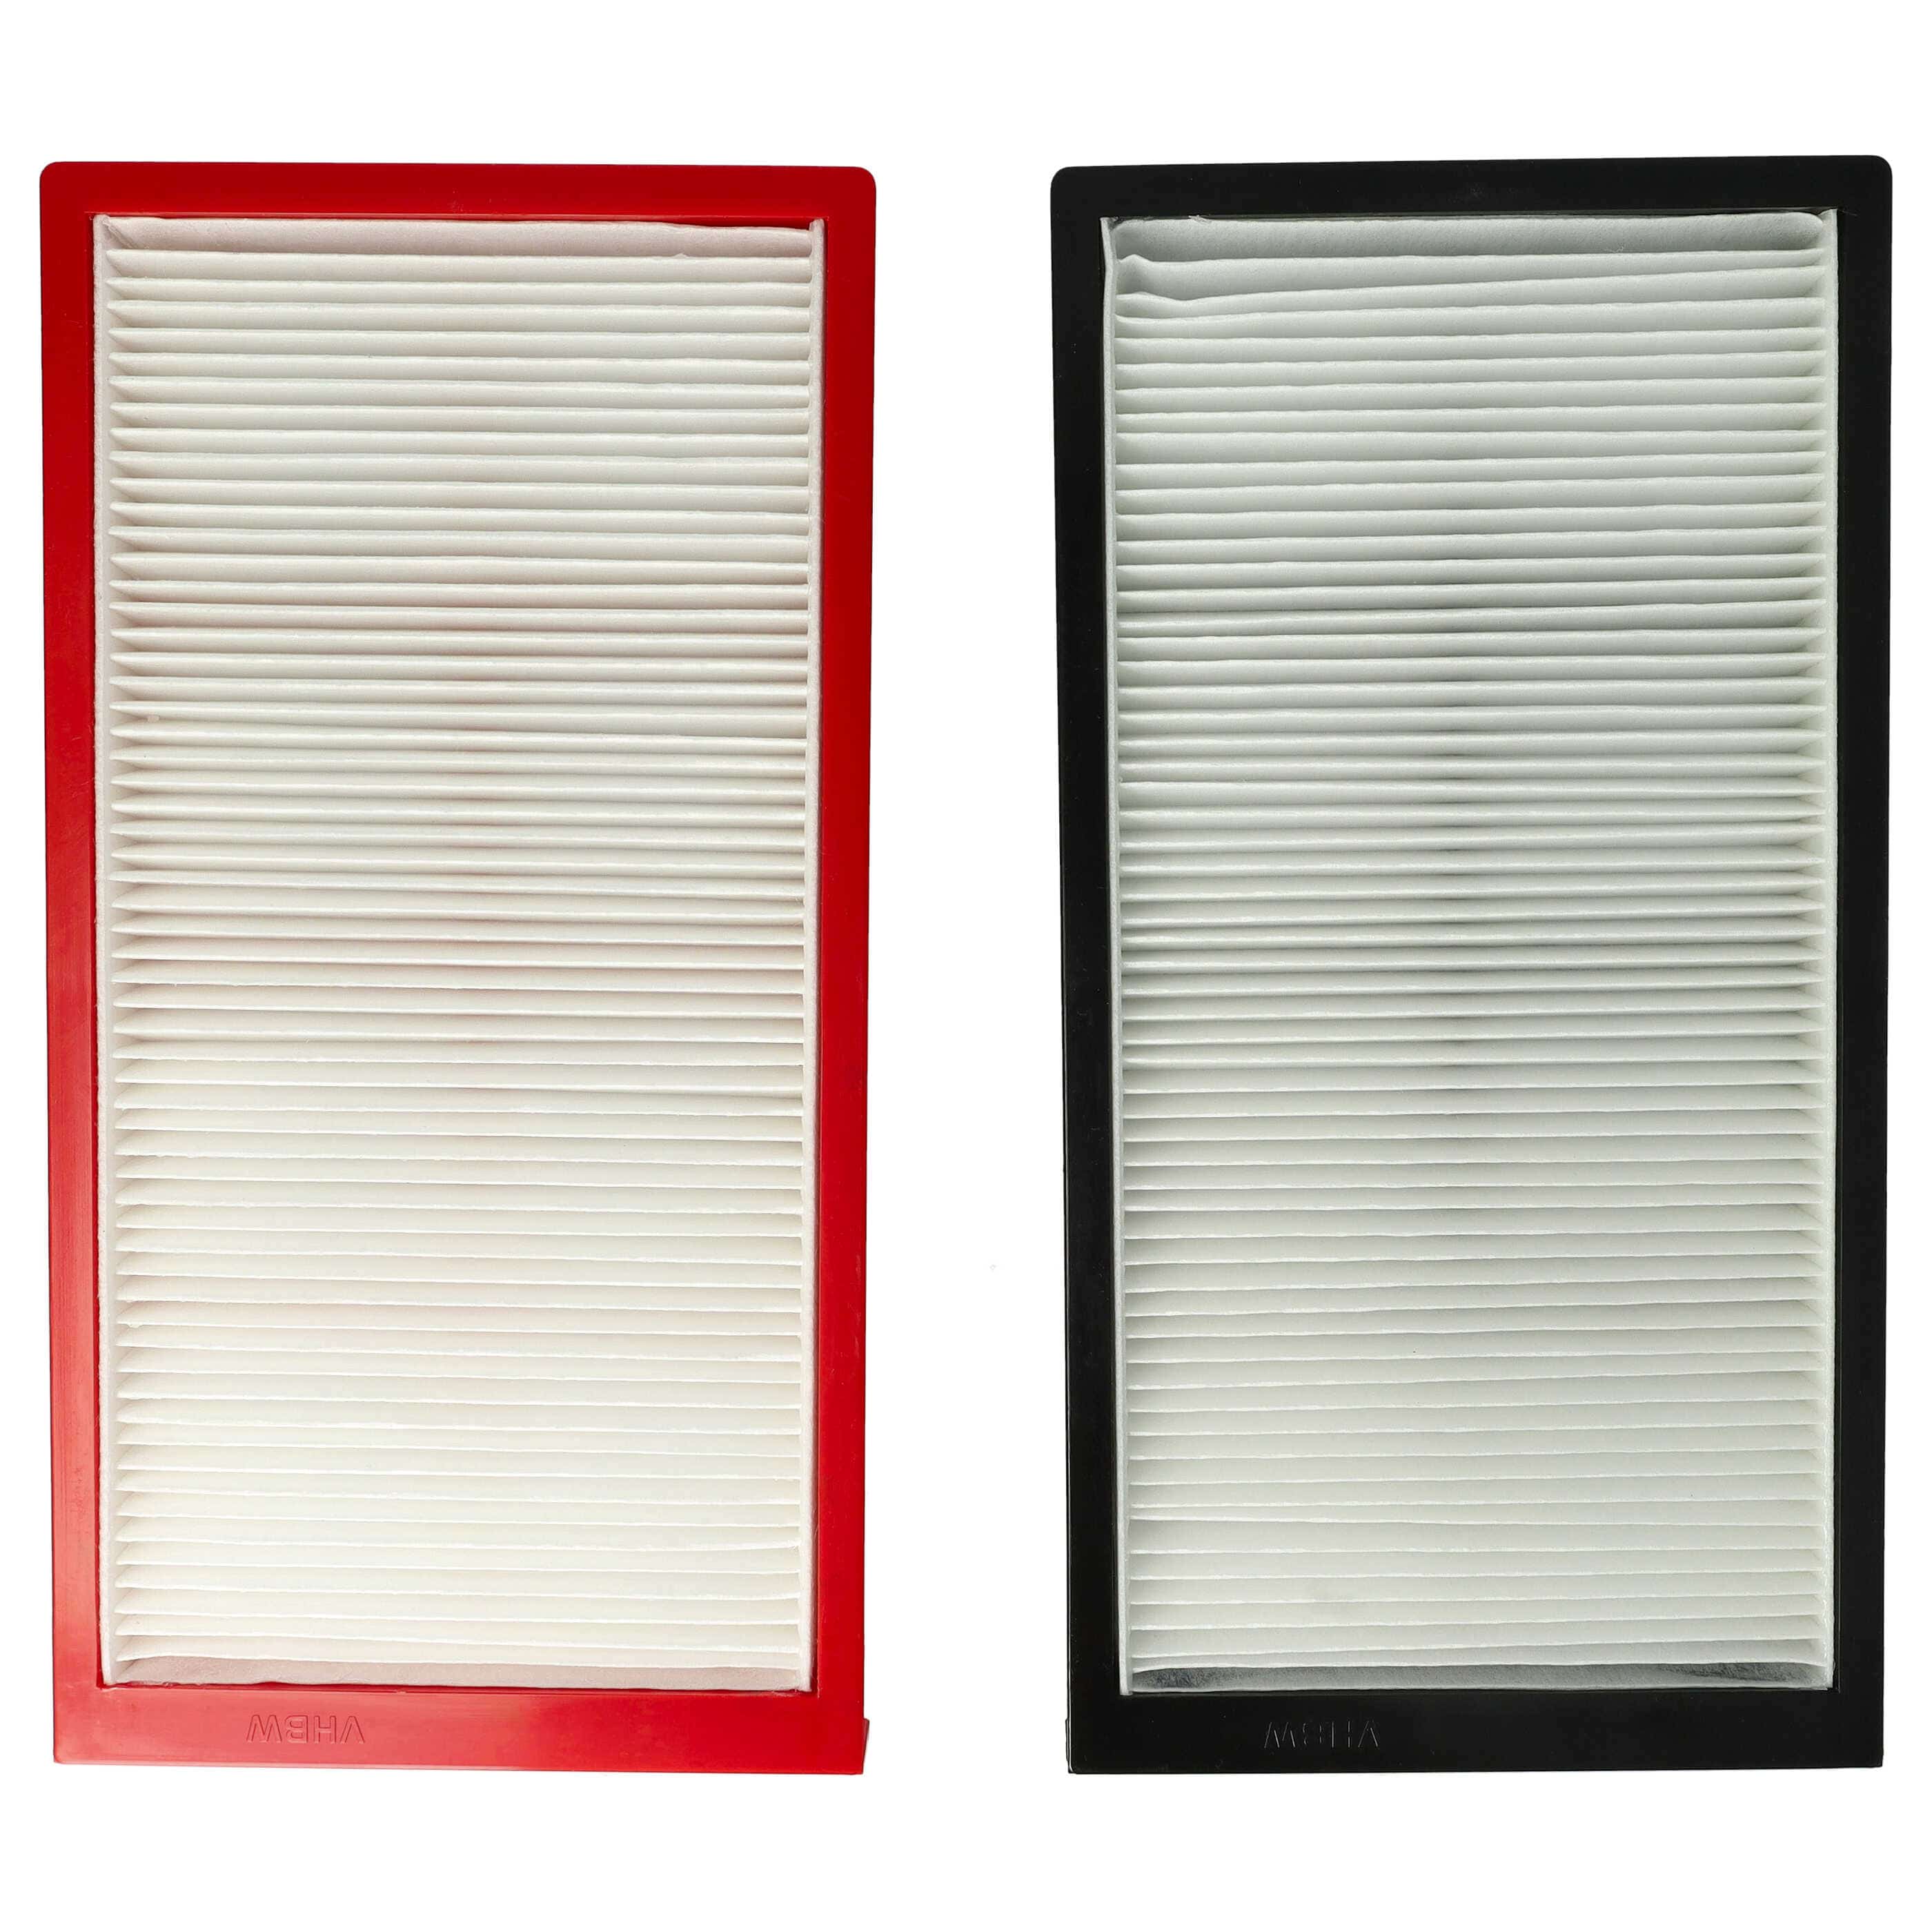 Air Filter Set Replacement for Wernig EFS G 90-200 GF for Ventilation Devices - G4 / F7